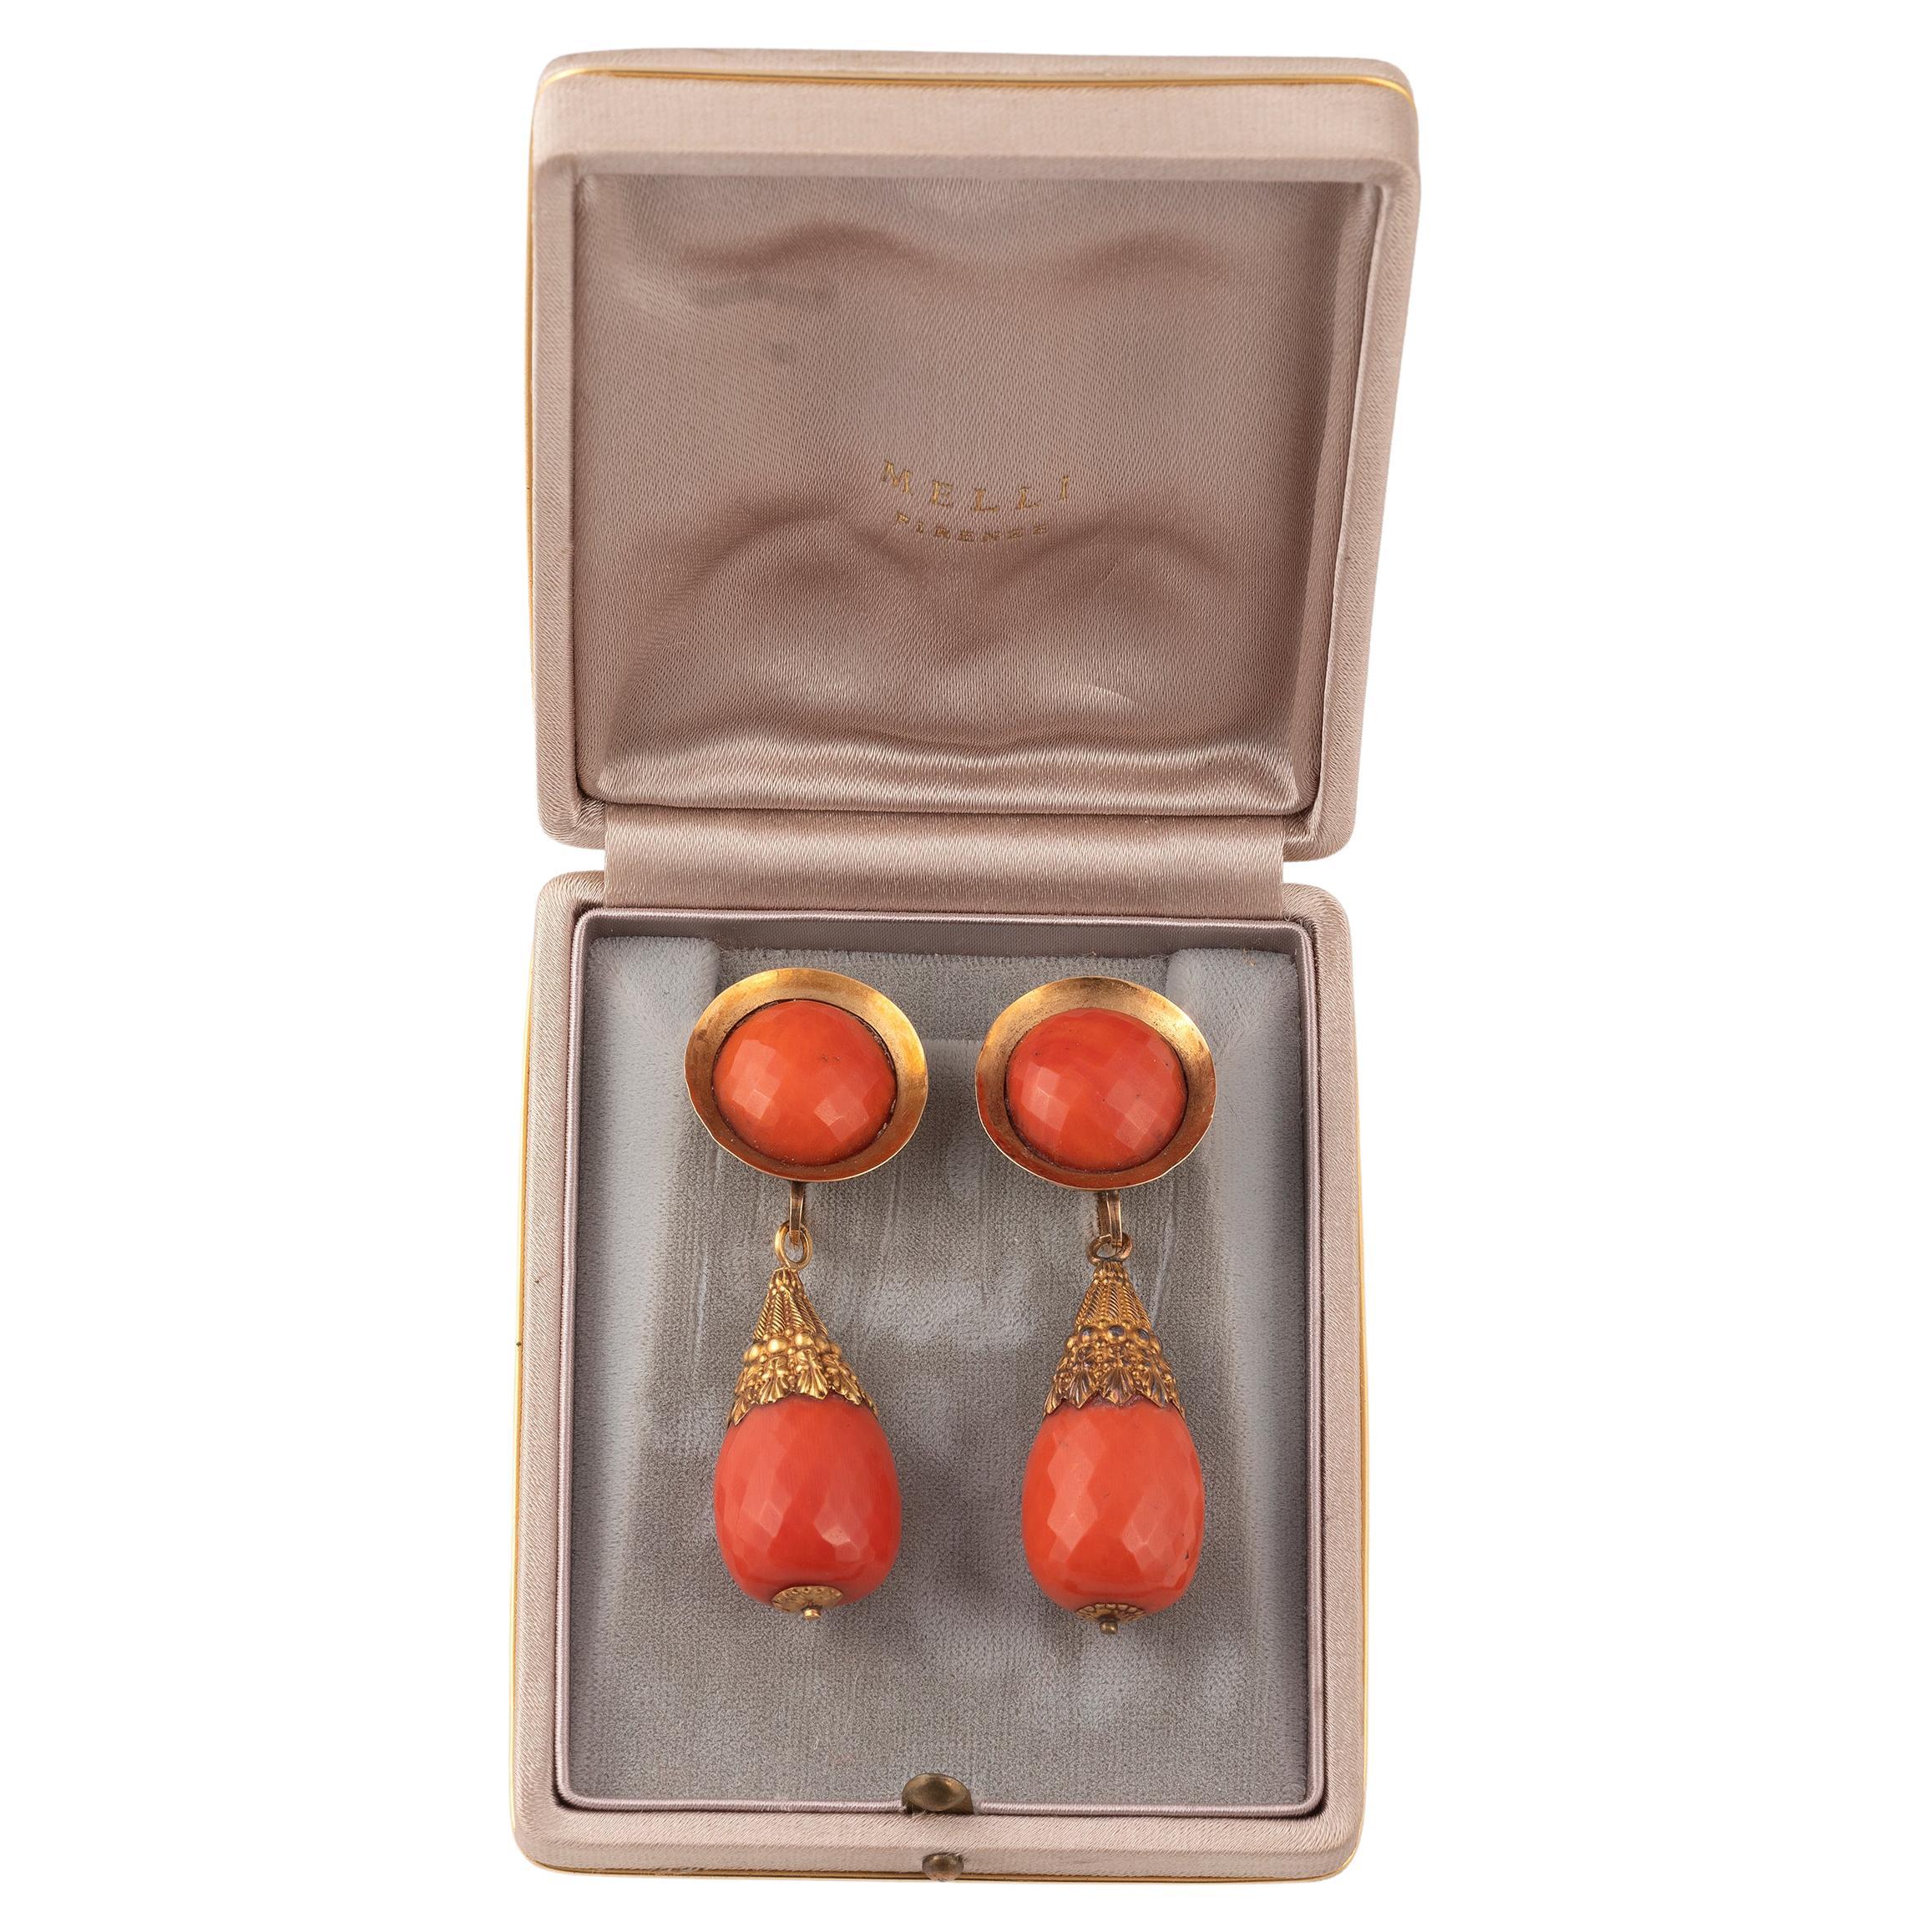 Each facetted coral earring decorated with gold cannetille work, supporting a similar detachable coral drop, circa 1870
Lenght:6,5cm
Weight: 37gr.